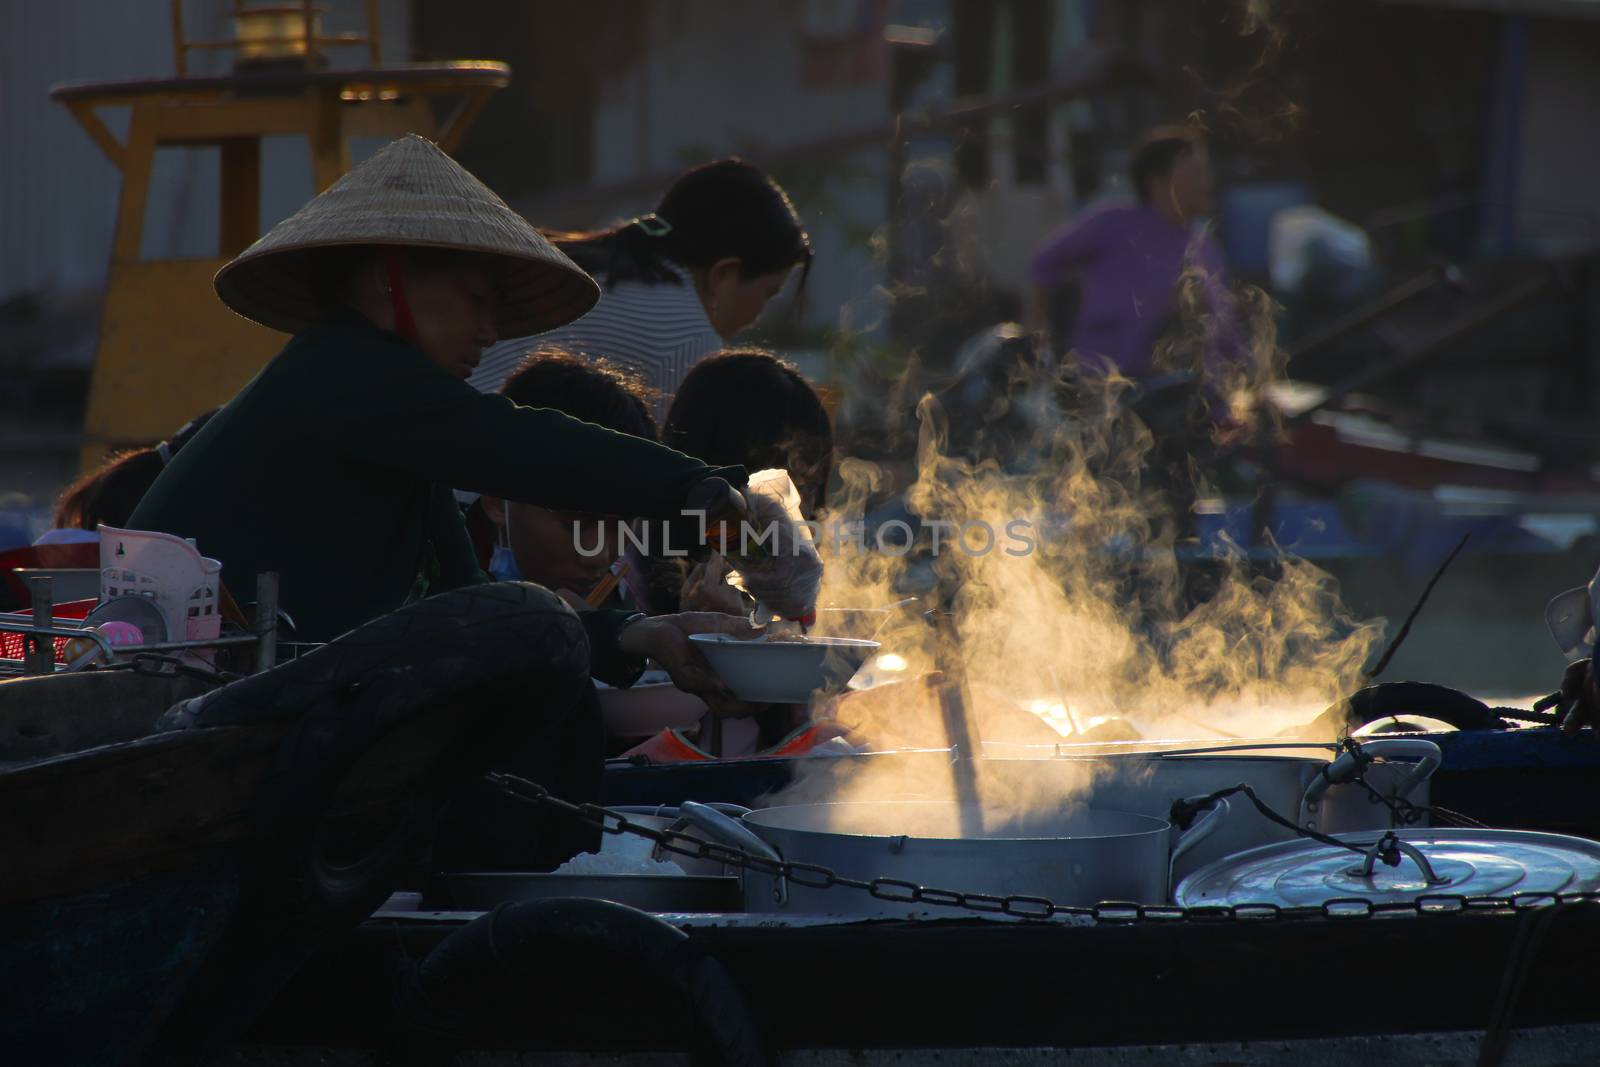 Editorial. Food vendors selling Vietnamese noodle soups in small wooden boats by Sonnet15